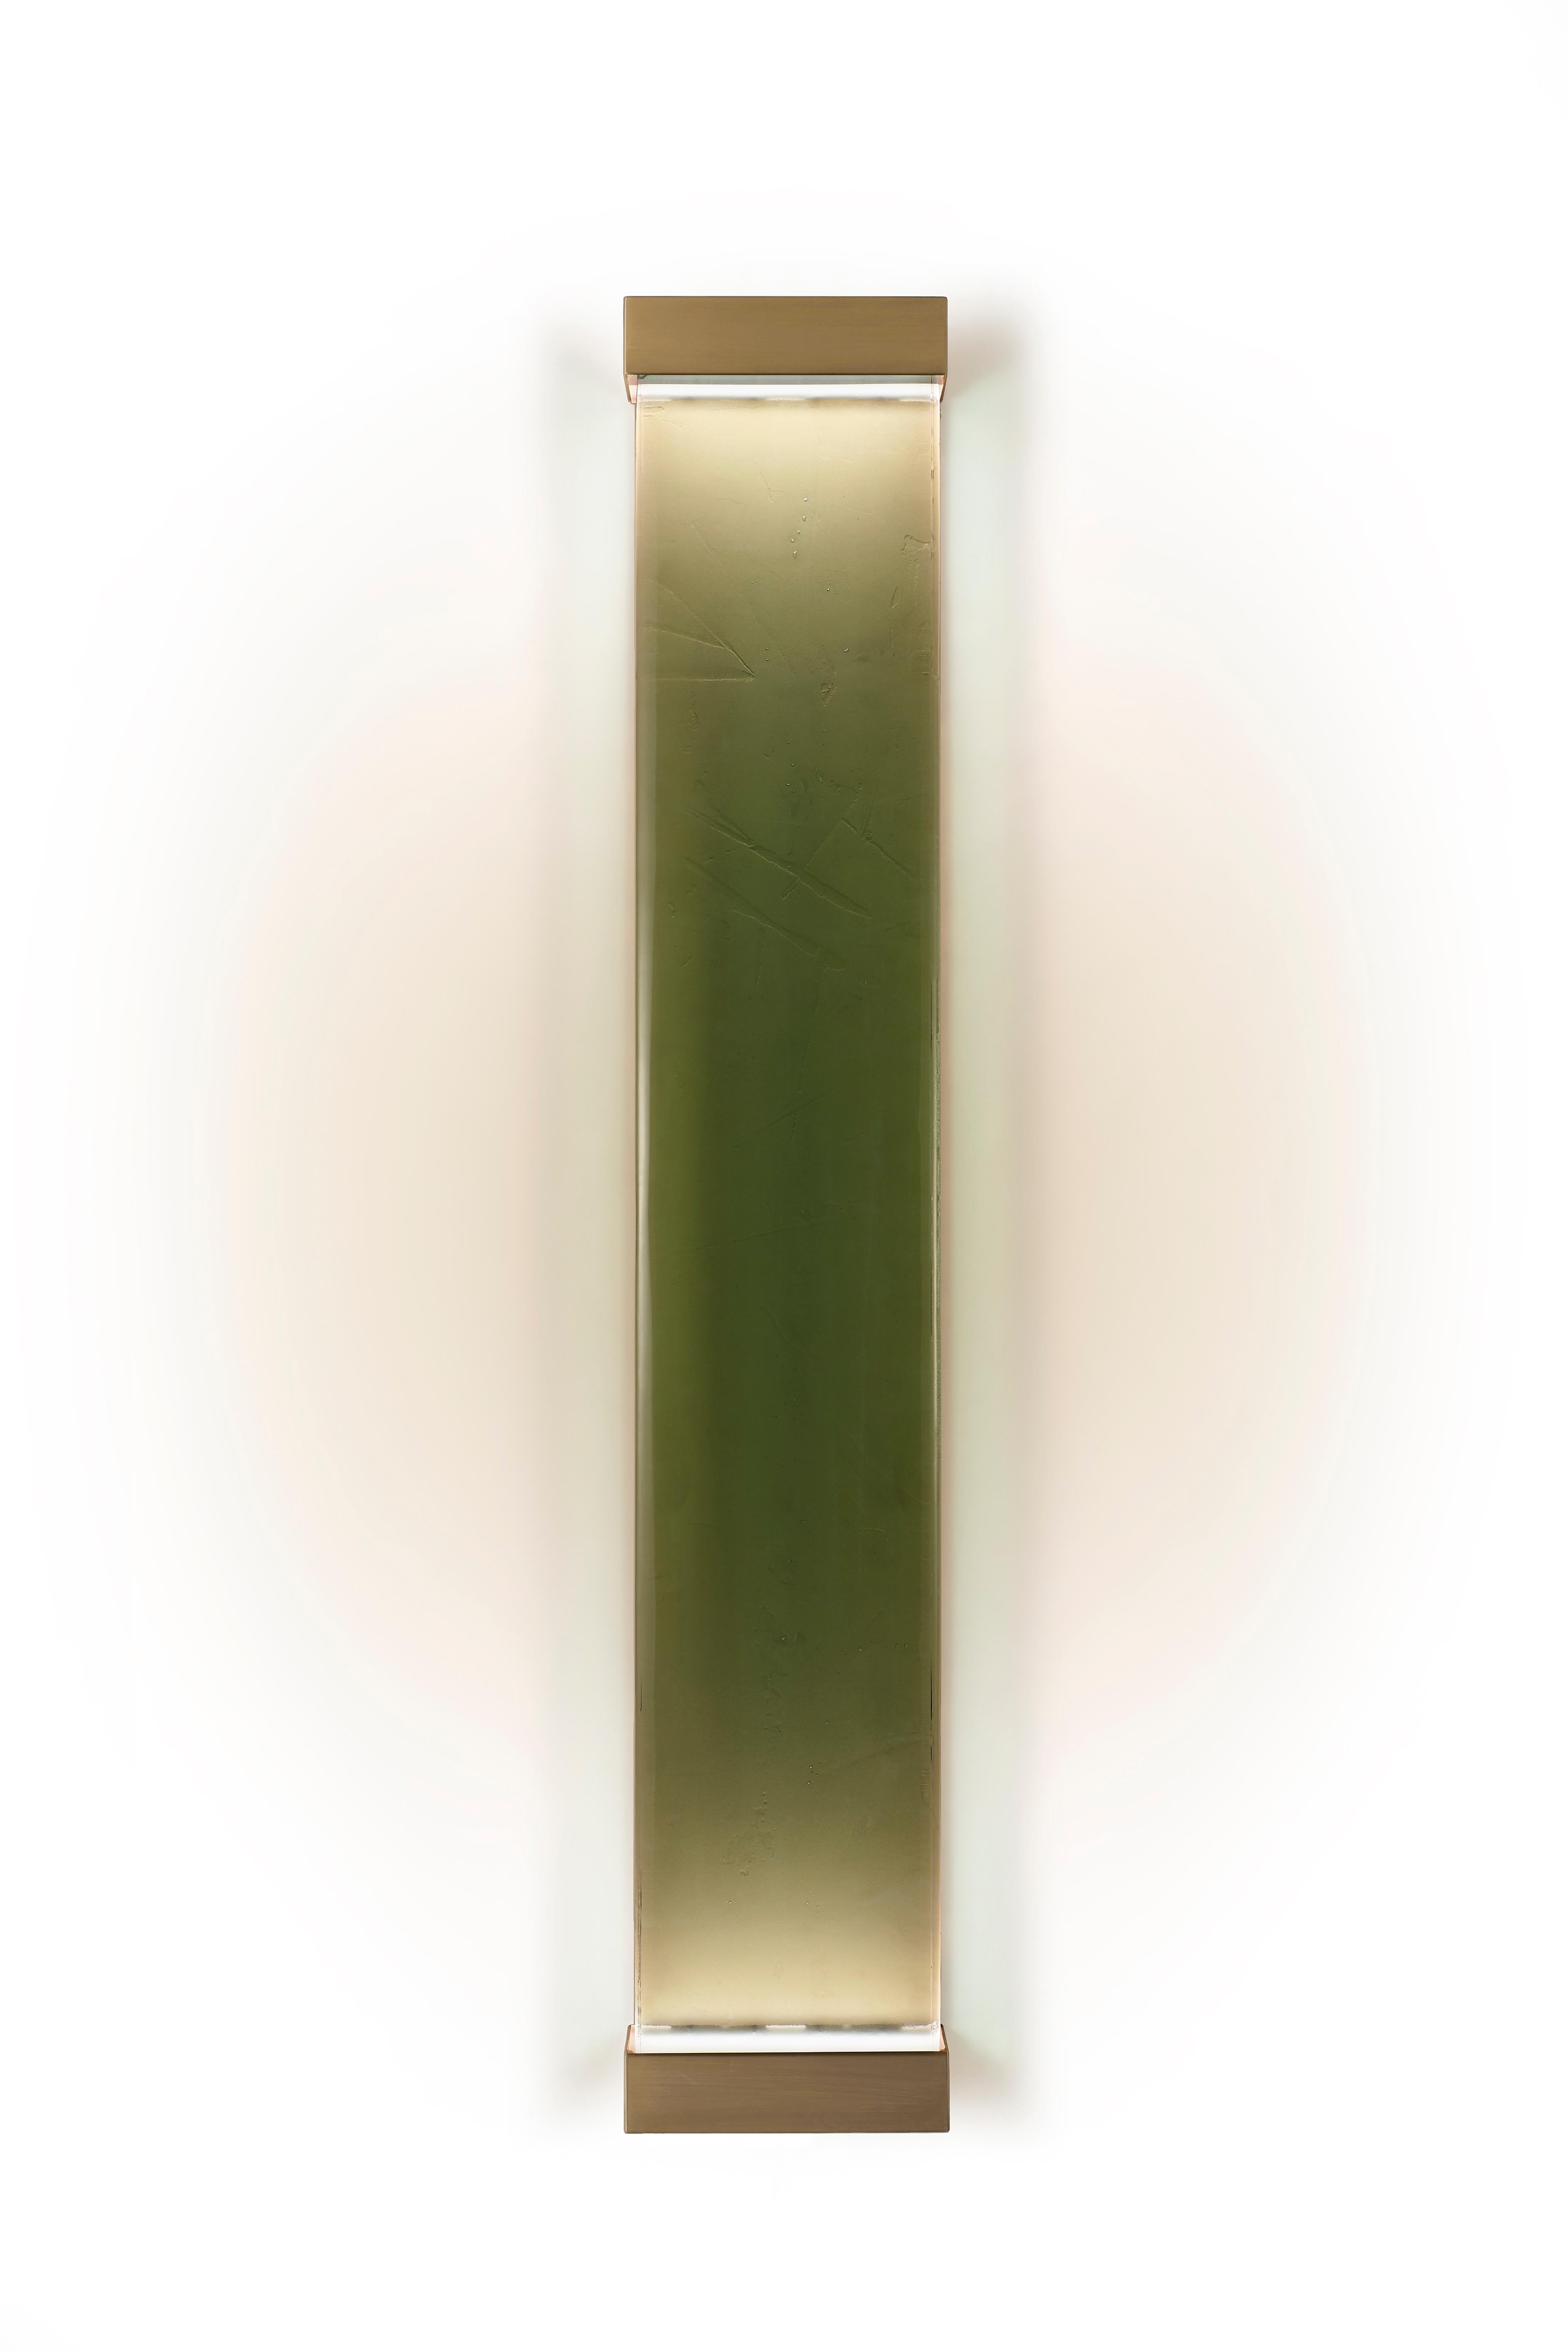 Jud Wall Lamps Agave by Draga&Aurel Resin, 21st Century Glass Resin Brass For Sale